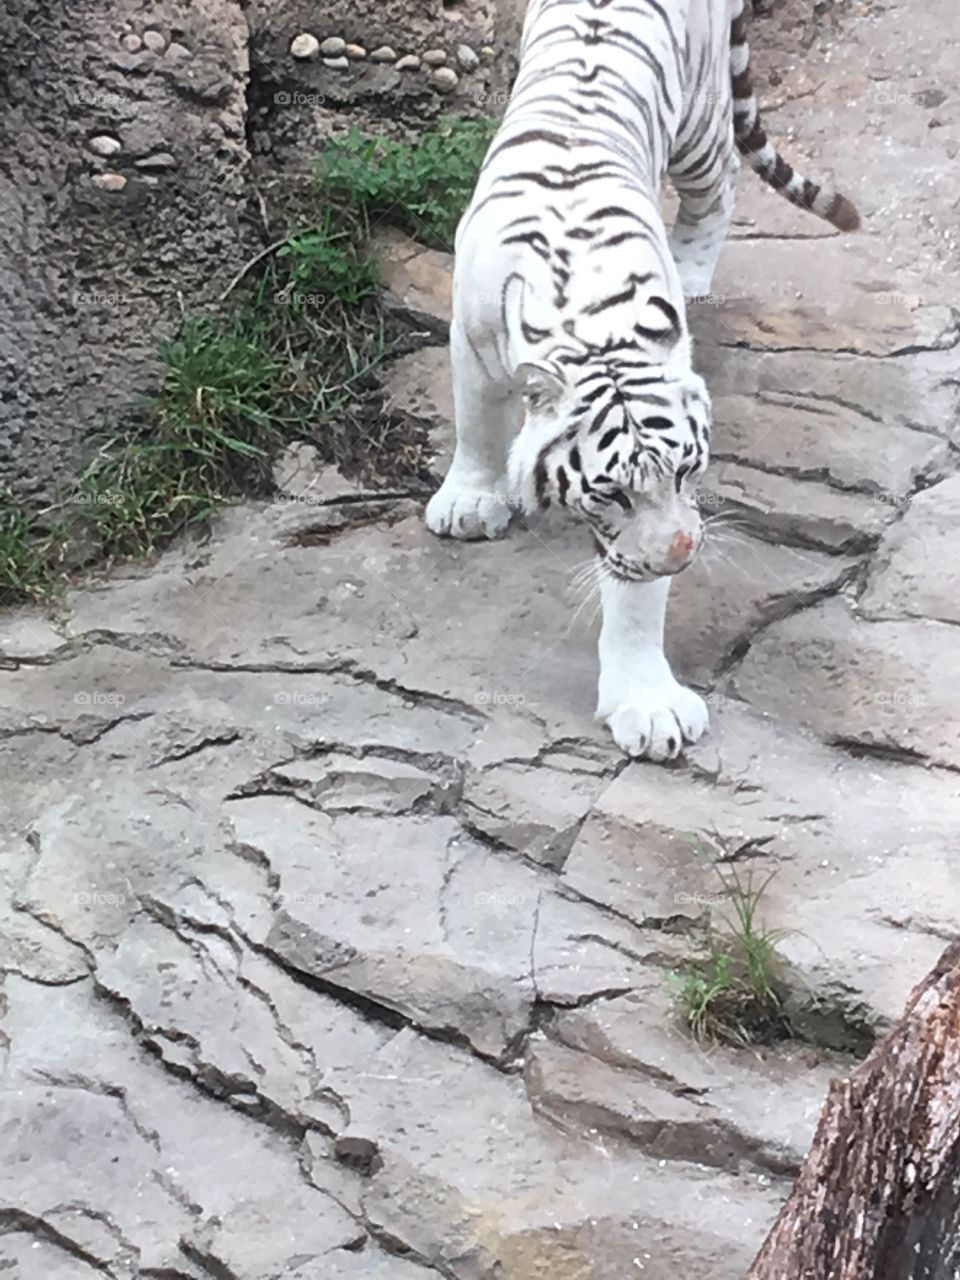 White tiger on the move